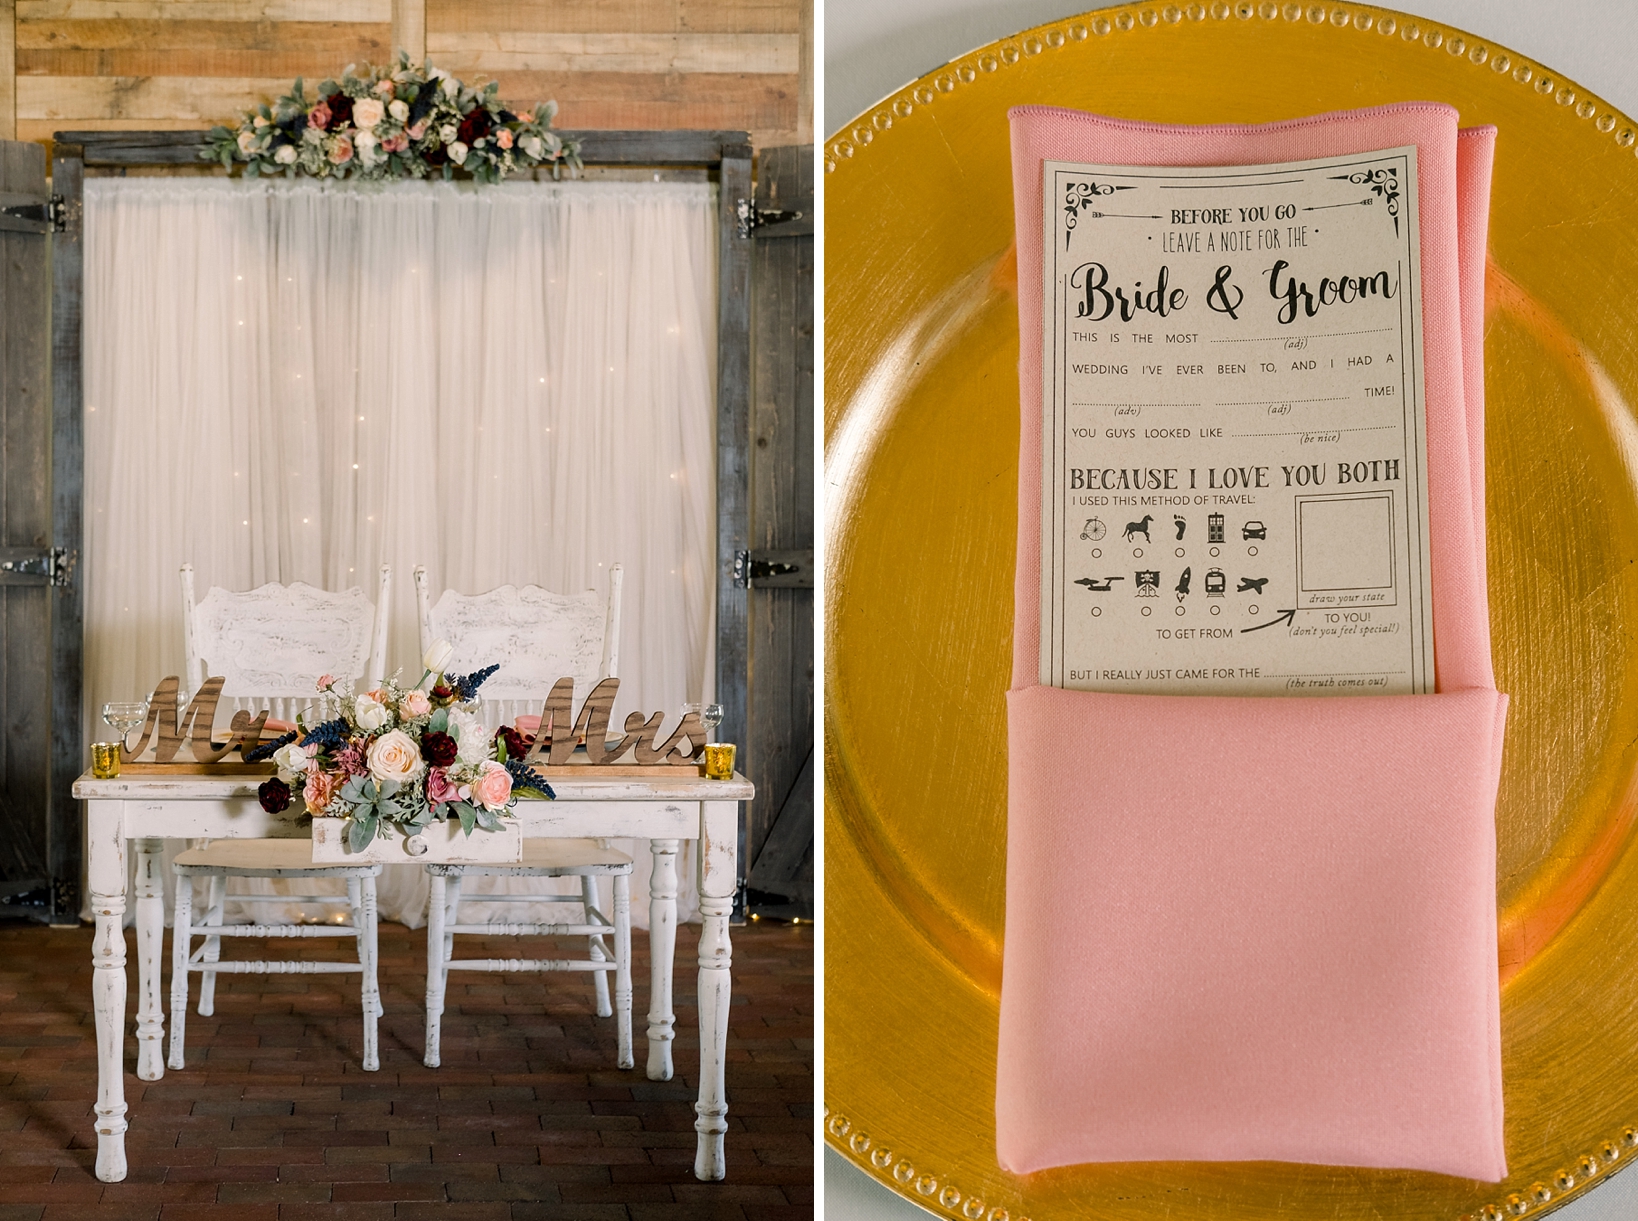 The head table during the reception and a dinner menu tucked into the pink napkin